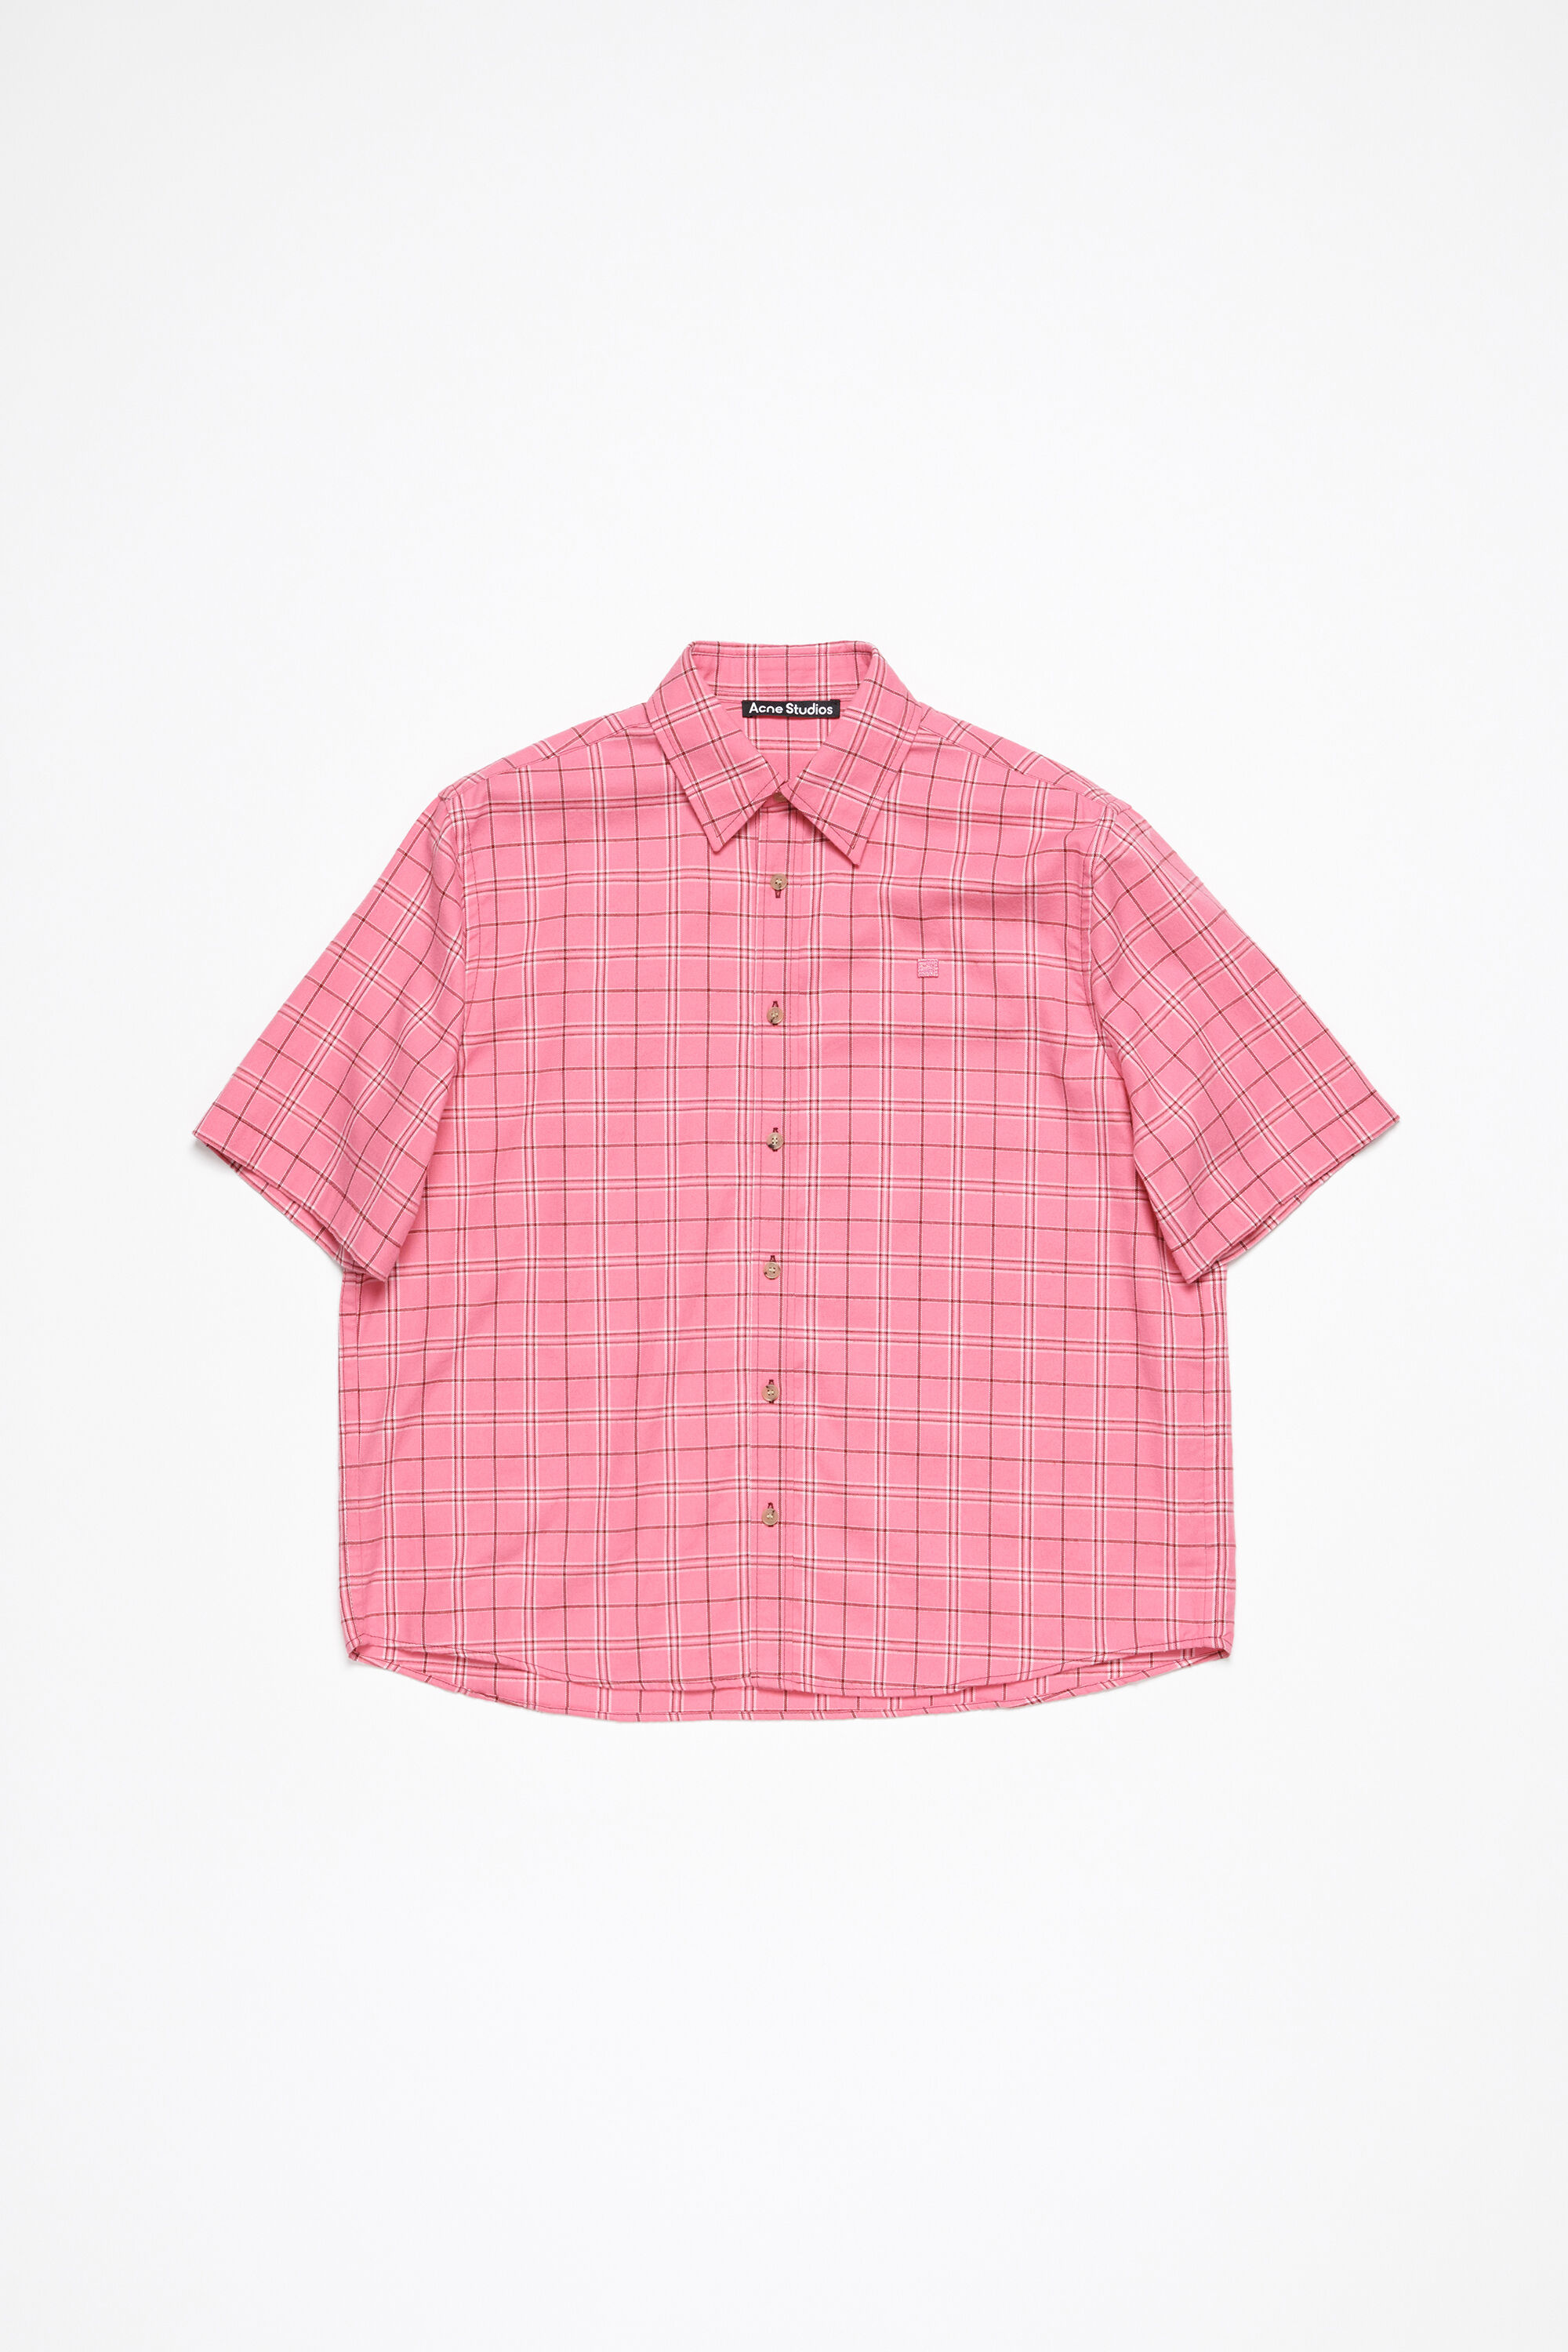 Acne Studios - Face collection - Shirts and overshirts